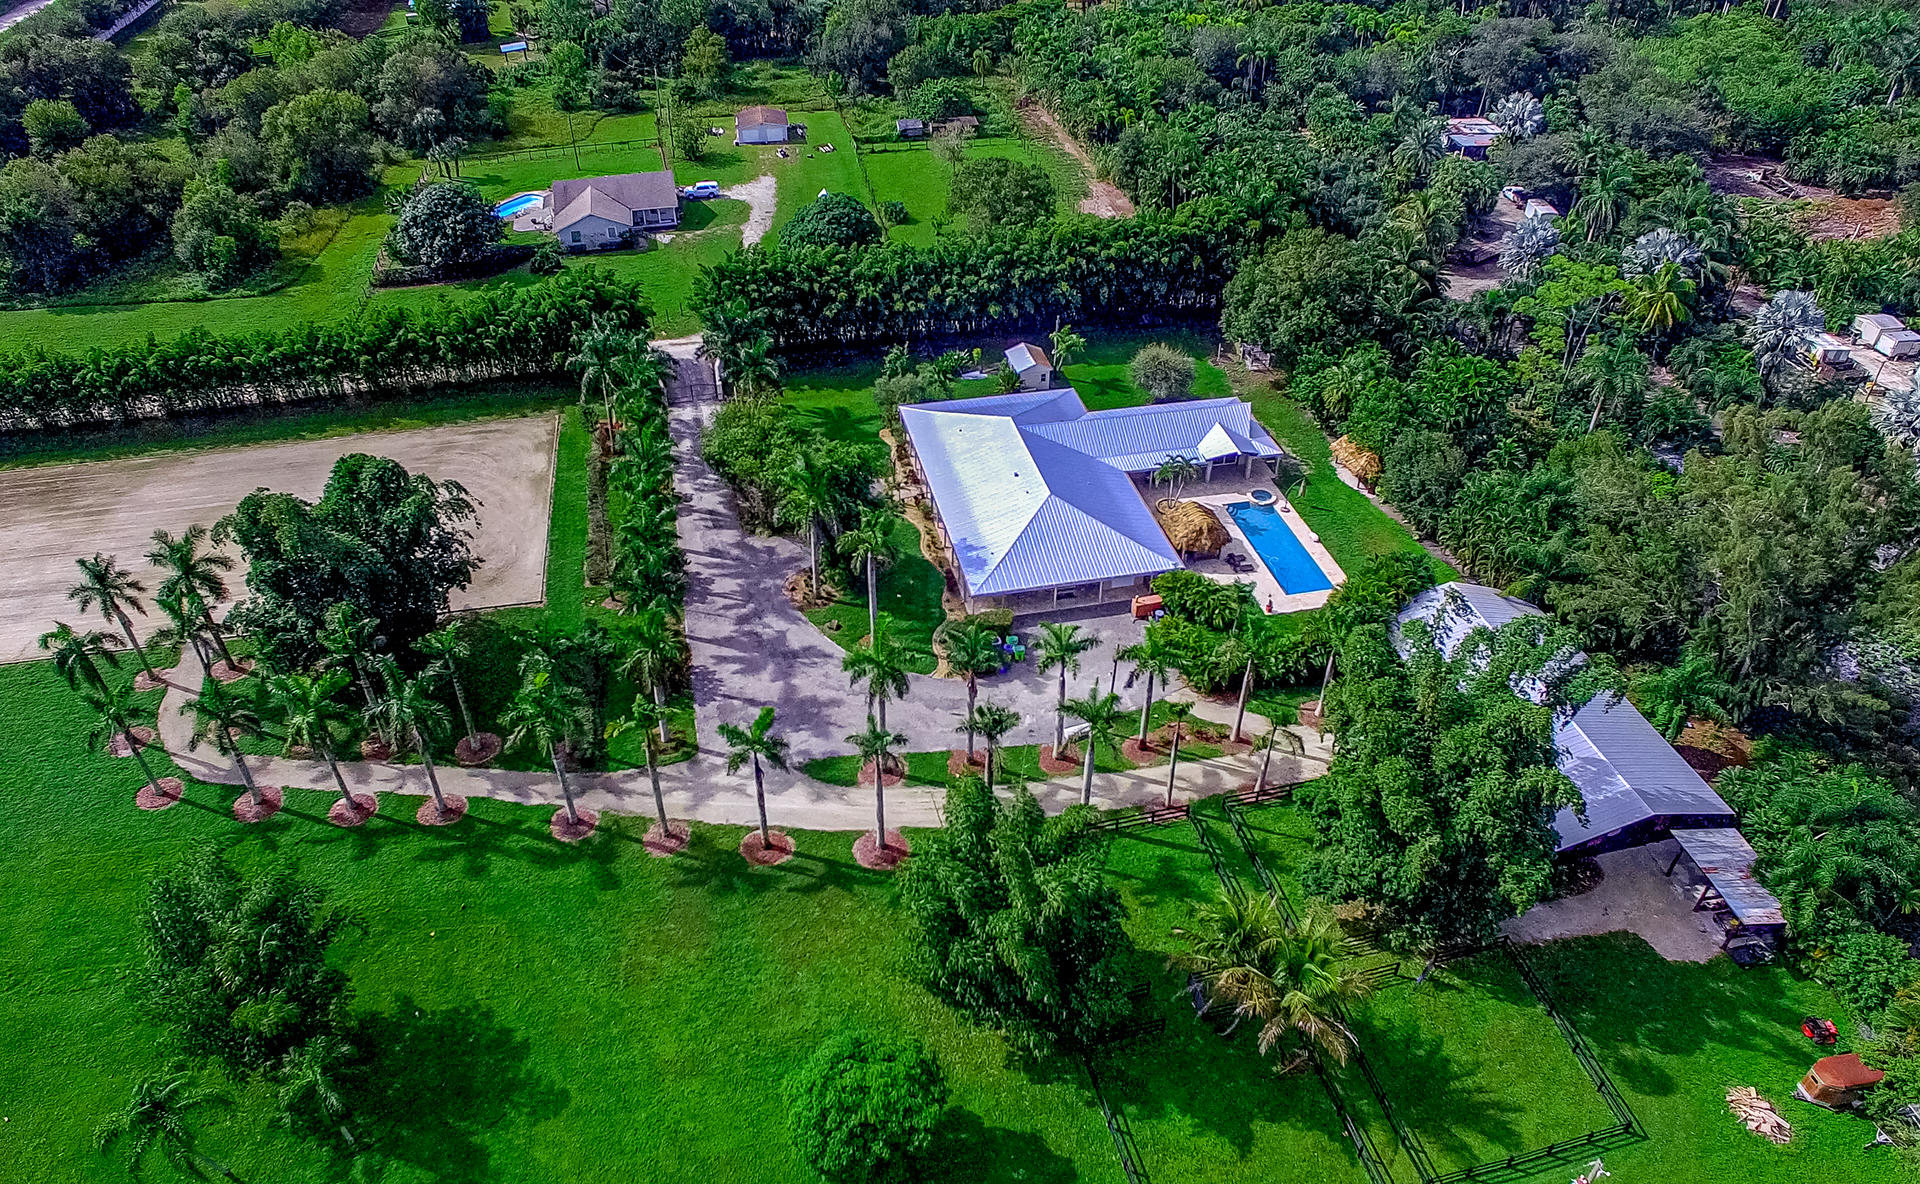 an aerial view of house with swimming pool outdoor seating and yard